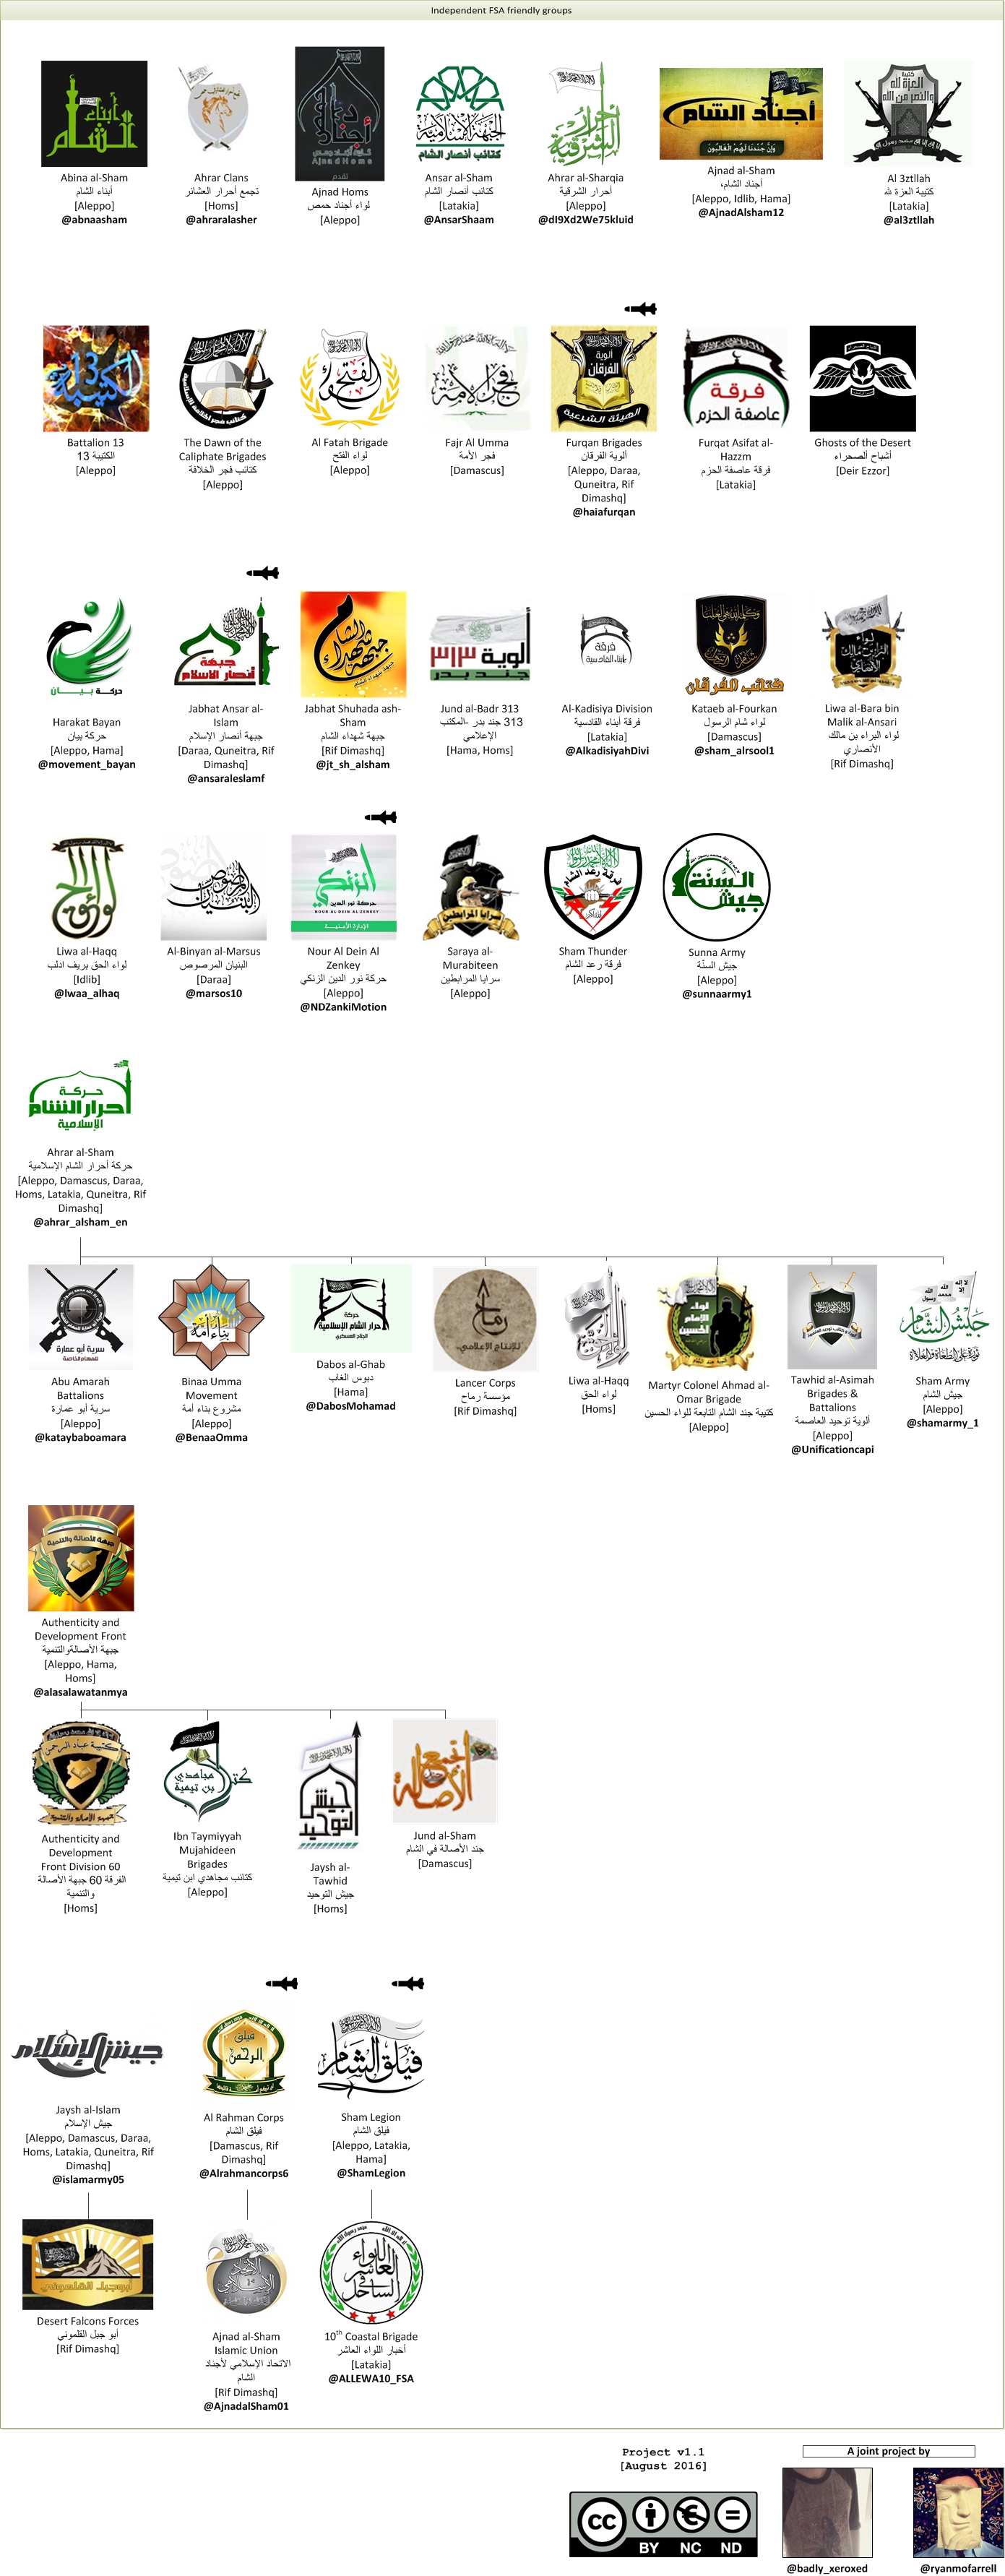 All independent FSA friendly groups— missile symbols indicate a faction has been supplied with BGM-71 TOW ATGMs